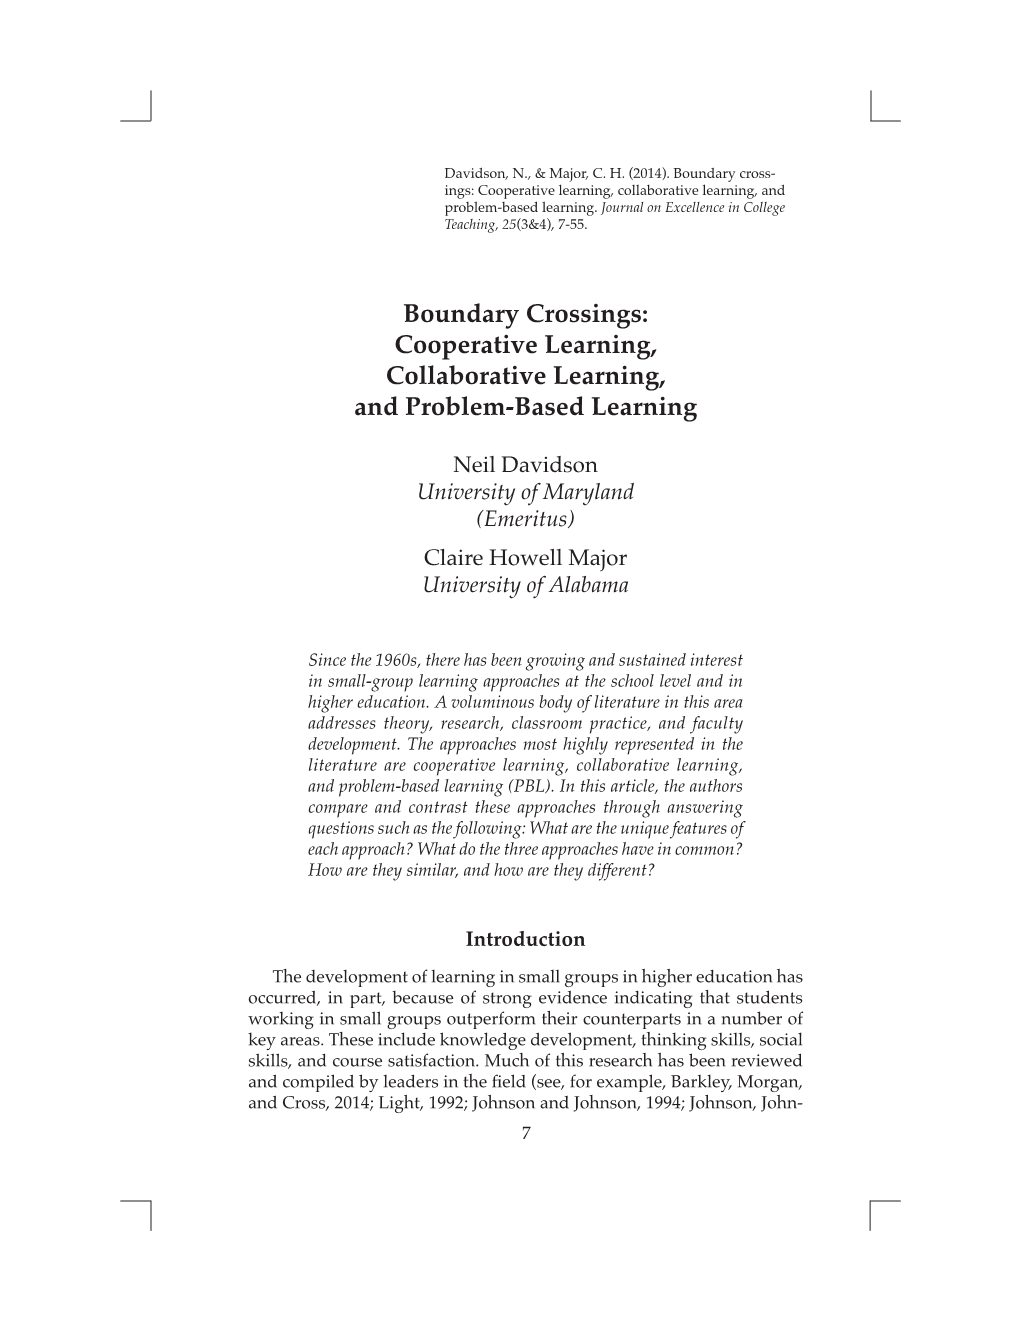 Boundary Crossings: Cooperative Learning, Collaborative Learning, and Problem-Based Learning